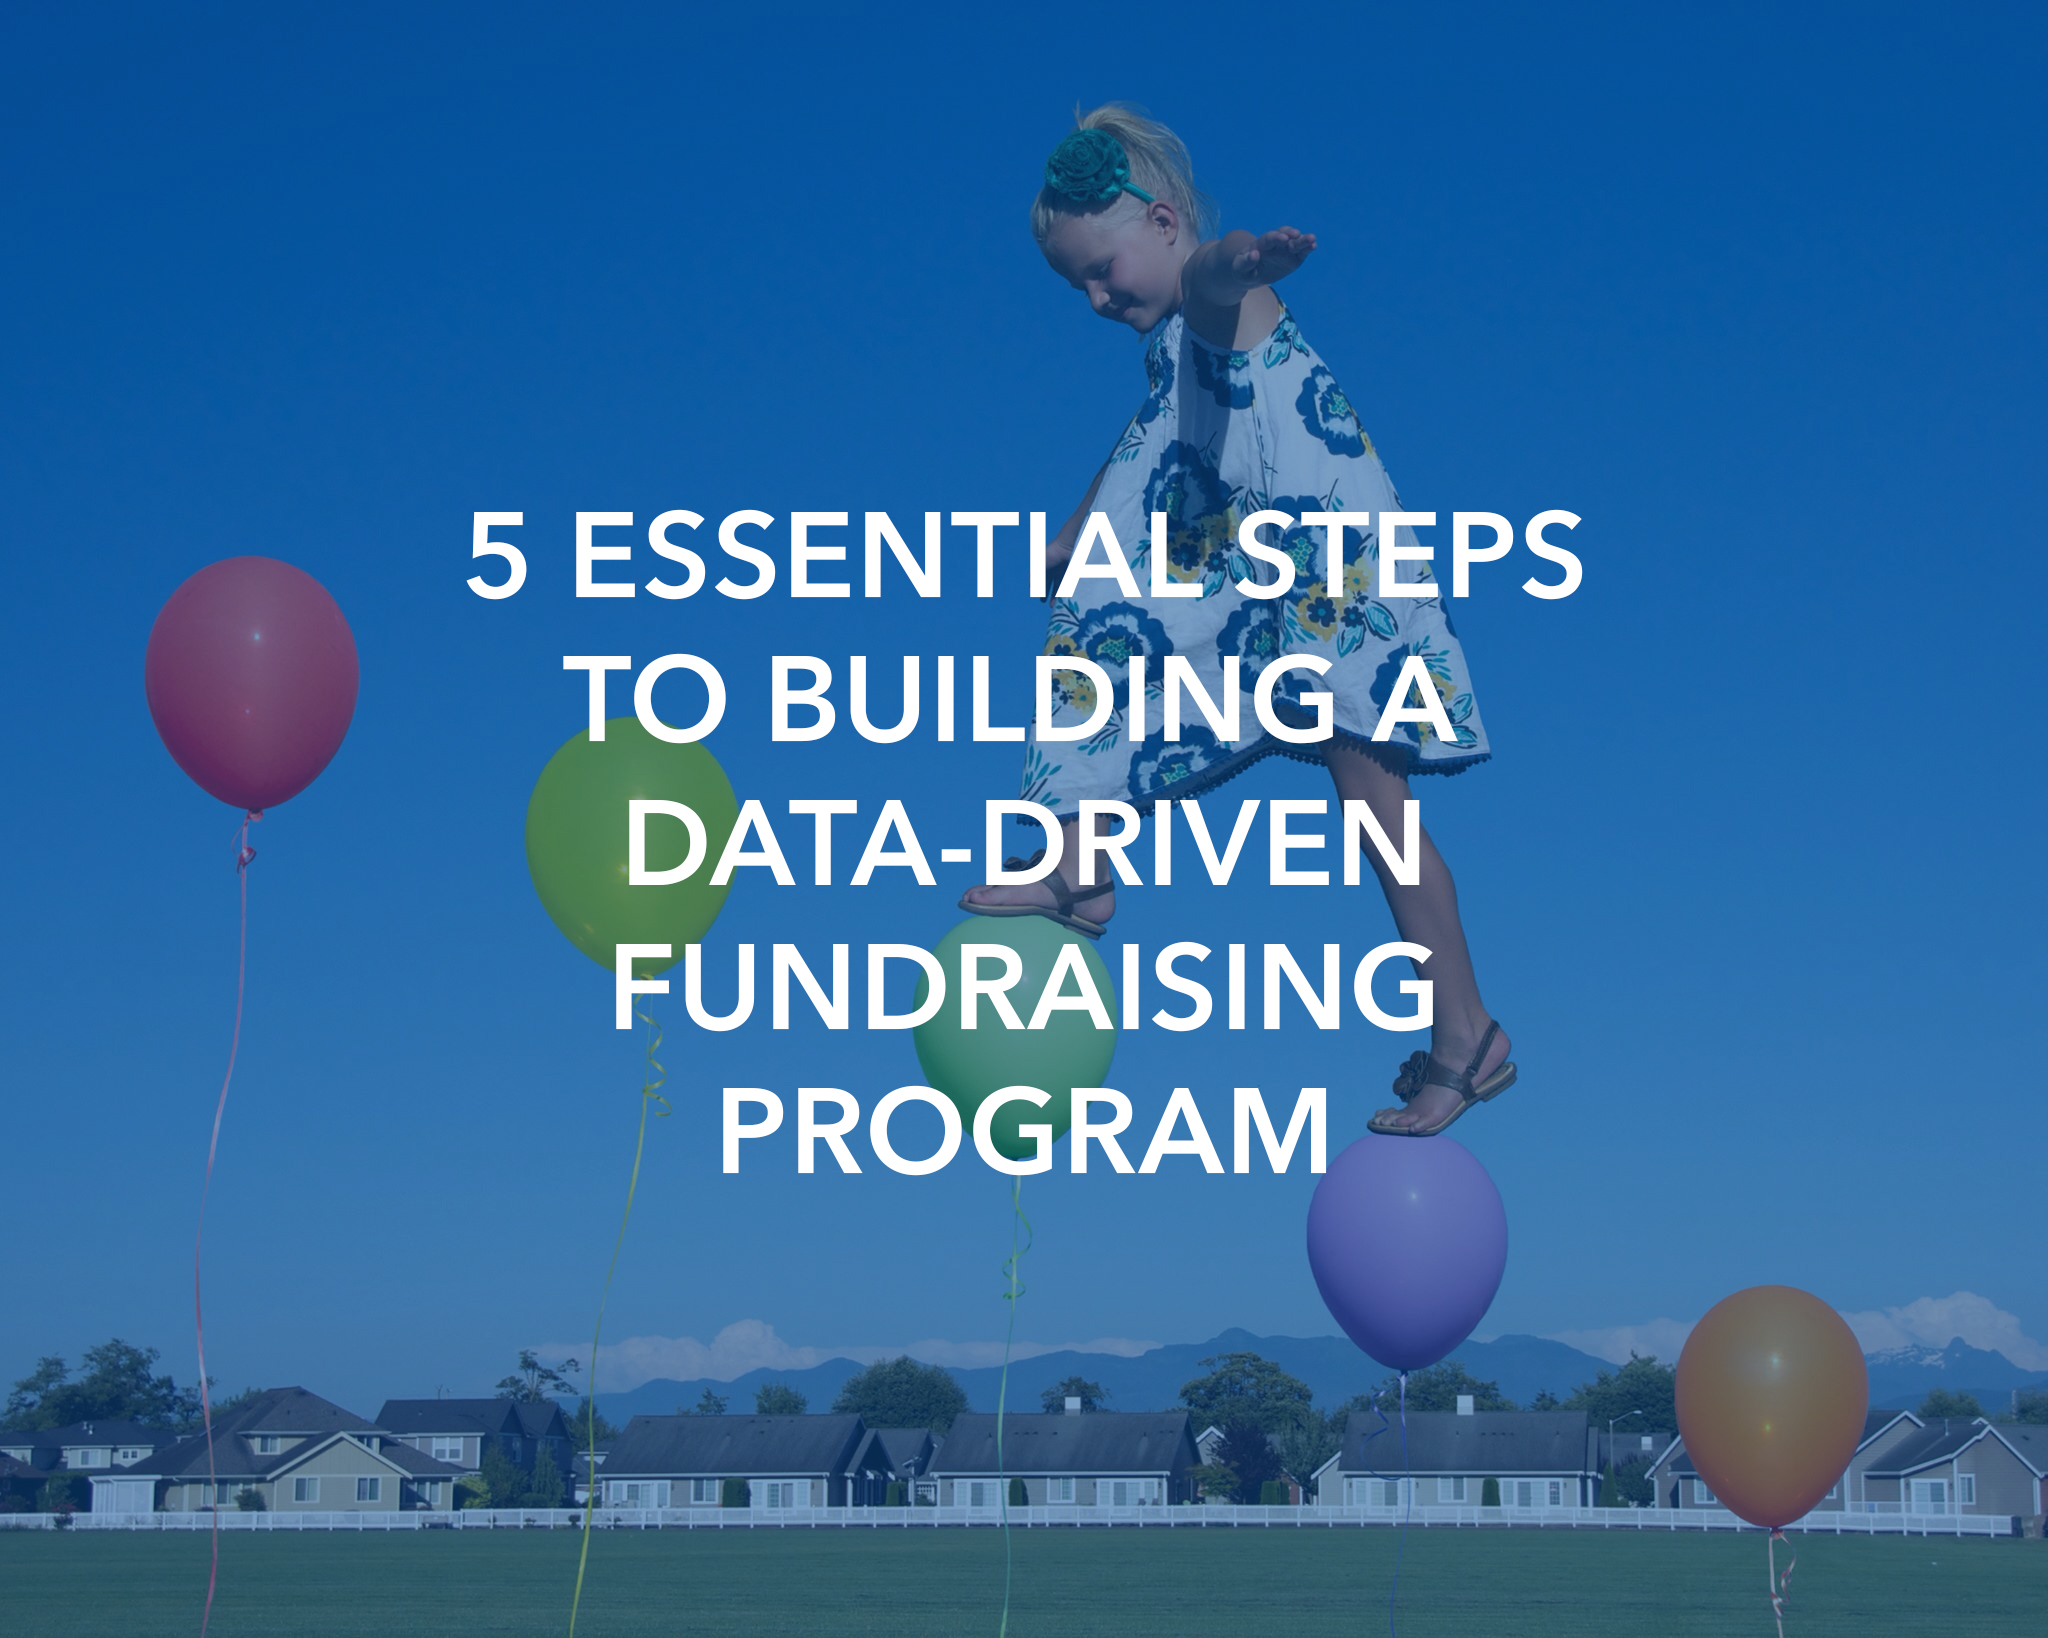 5 Essential Steps to Building a Data-Driven Fundraising Program